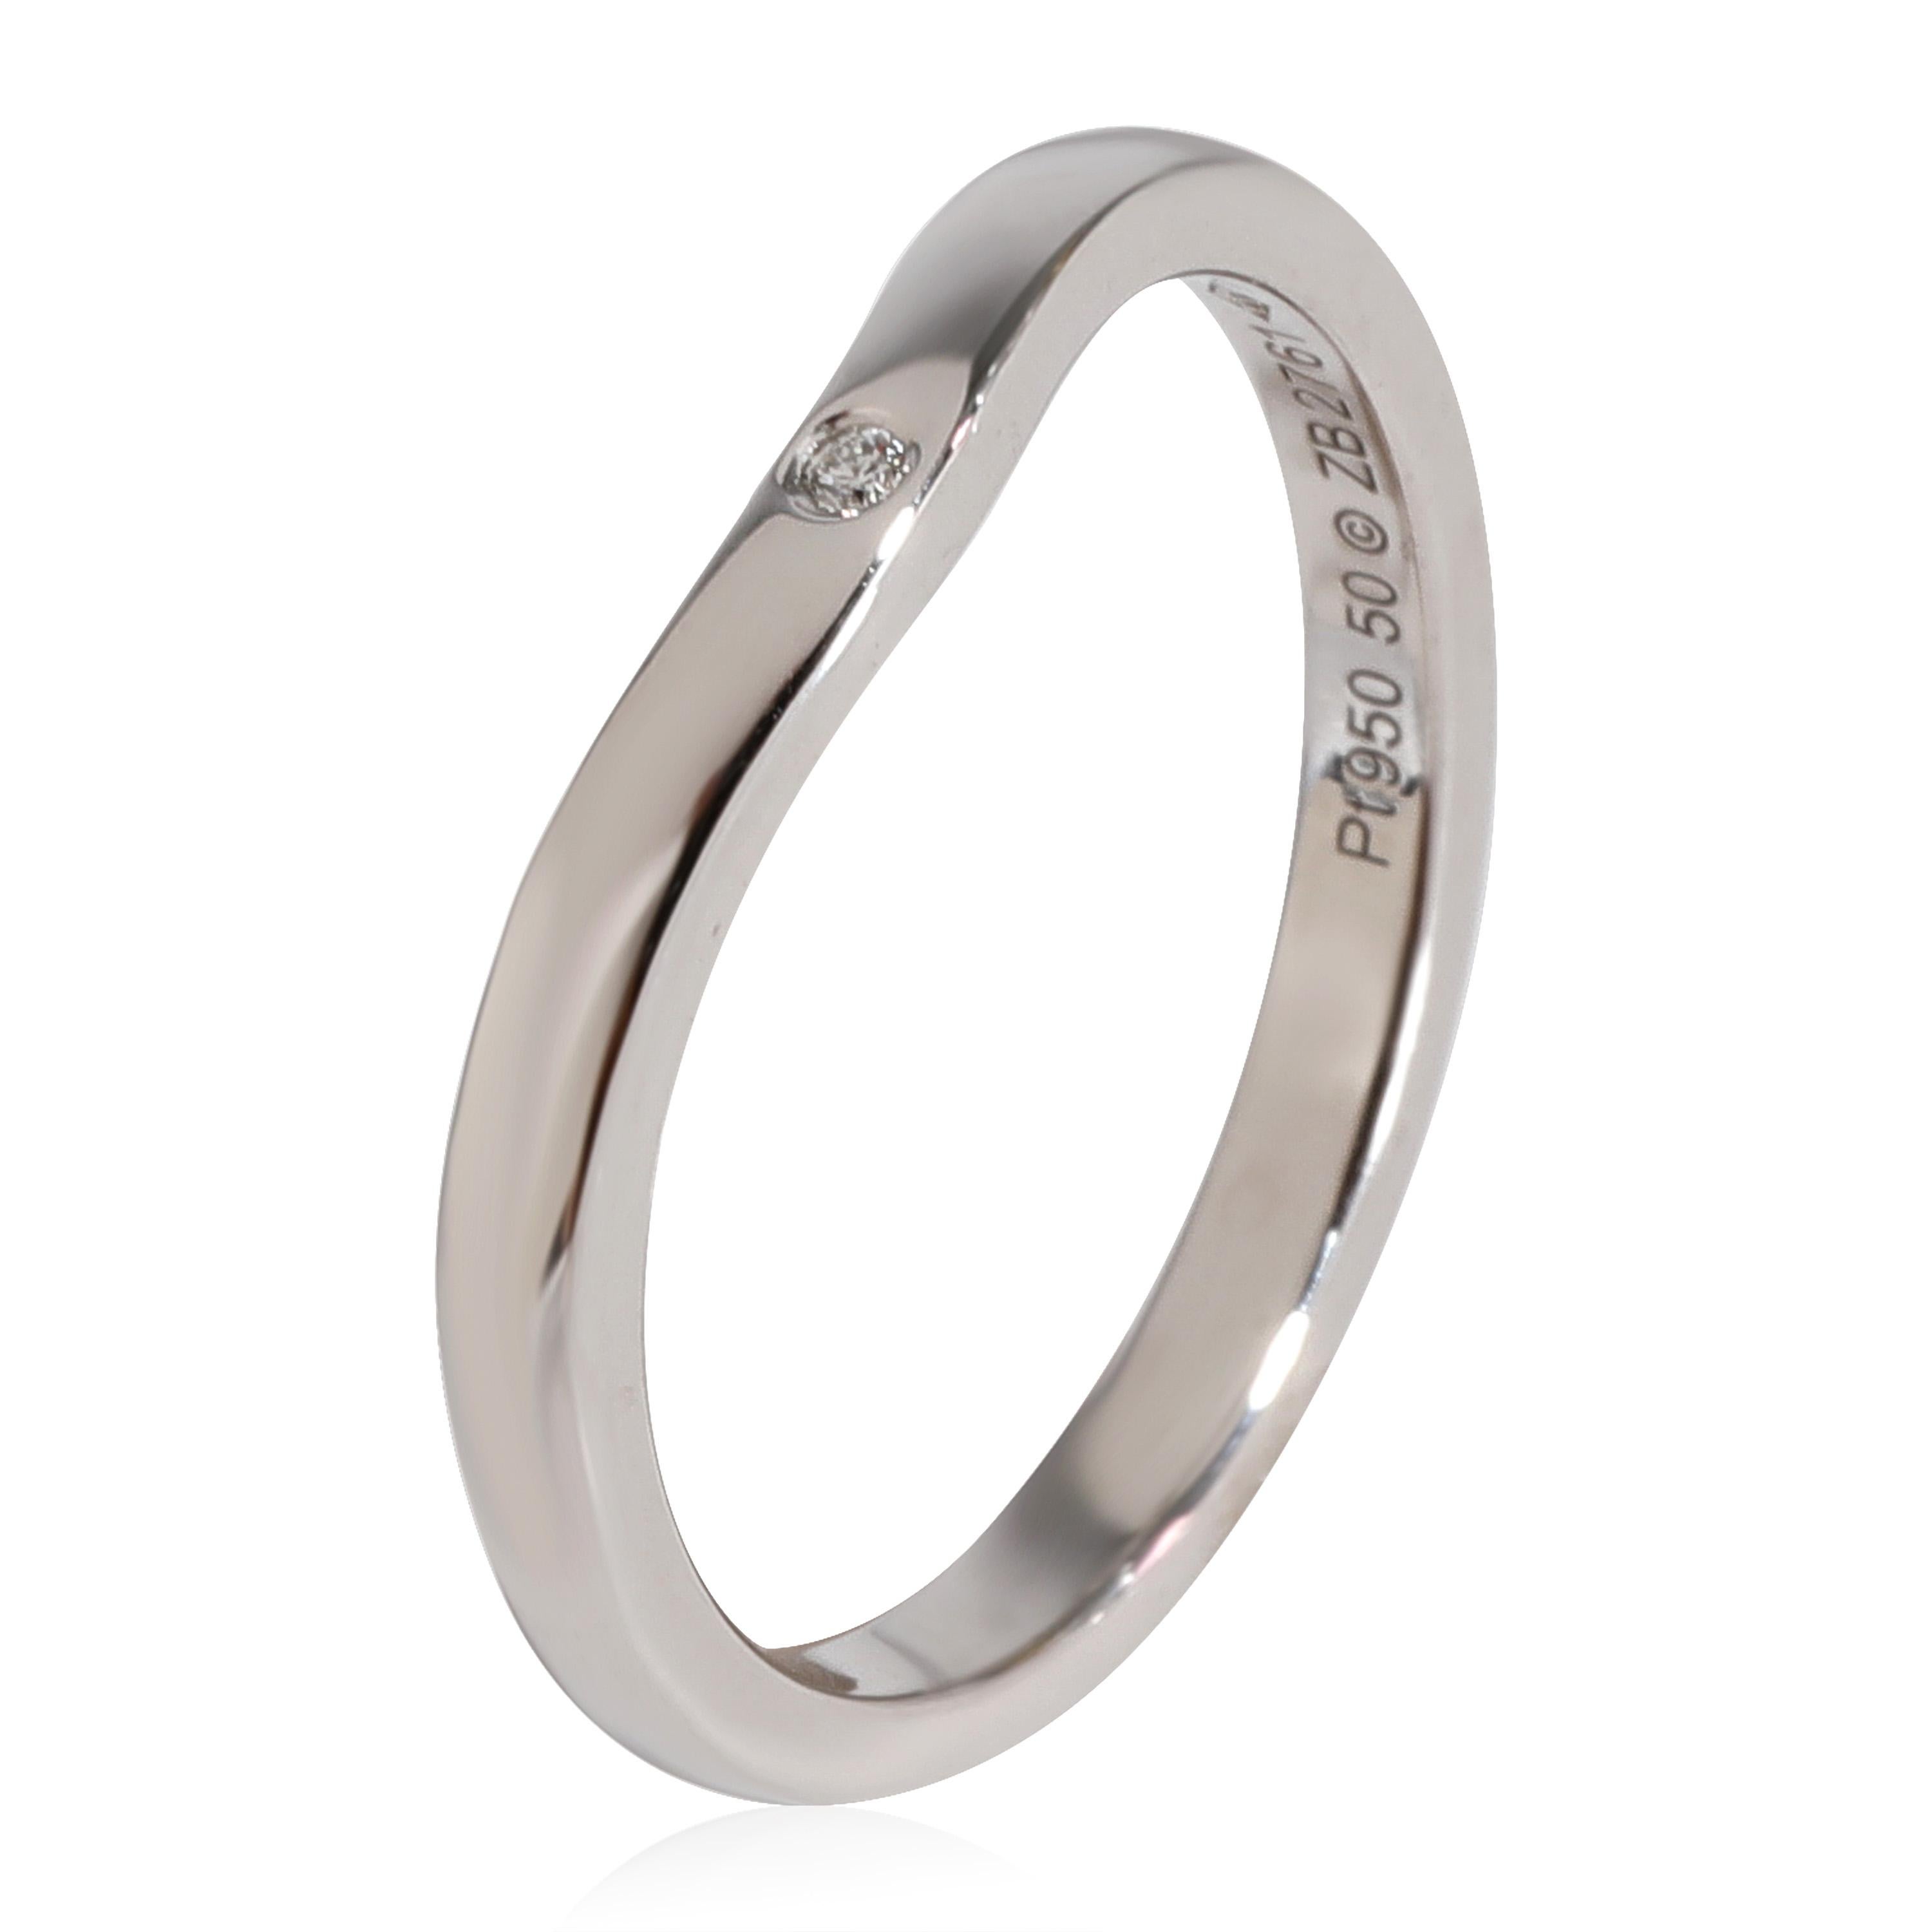 Cartier Ballerine Diamond Wedding Band in 950 Platinum 0.01 CTW

PRIMARY DETAILS
SKU: 121613
Listing Title: Cartier Ballerine Diamond Wedding Band in 950 Platinum 0.01 CTW
Condition Description: Retails for 1890 USD. In excellent condition and